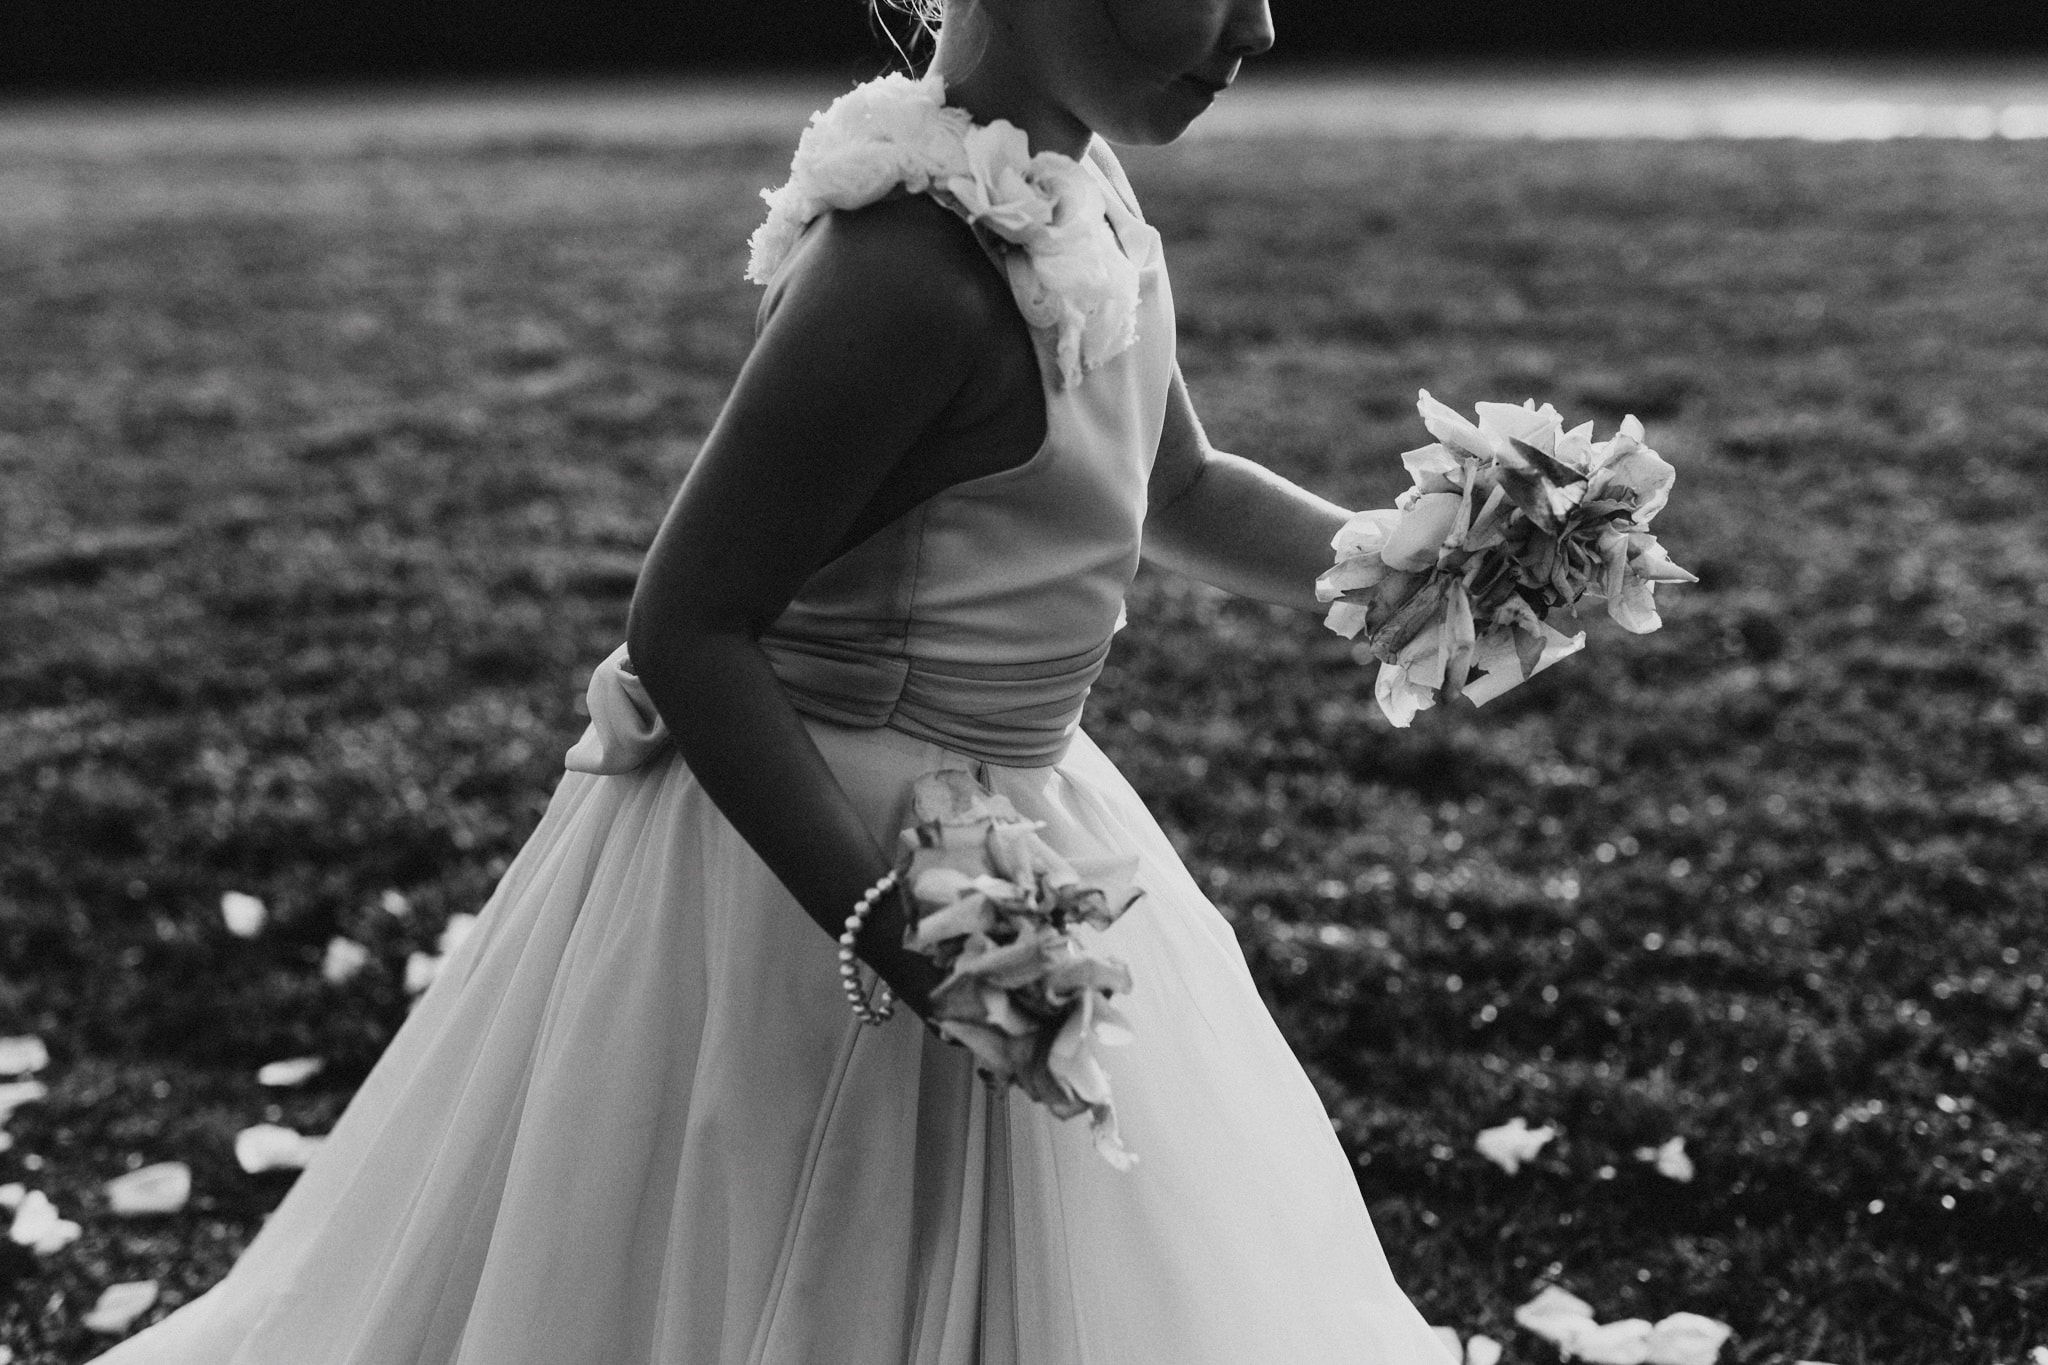 A flower girls runs with petals in her hands during a California wedding, moment caught by Josh Olson wedding photographer.